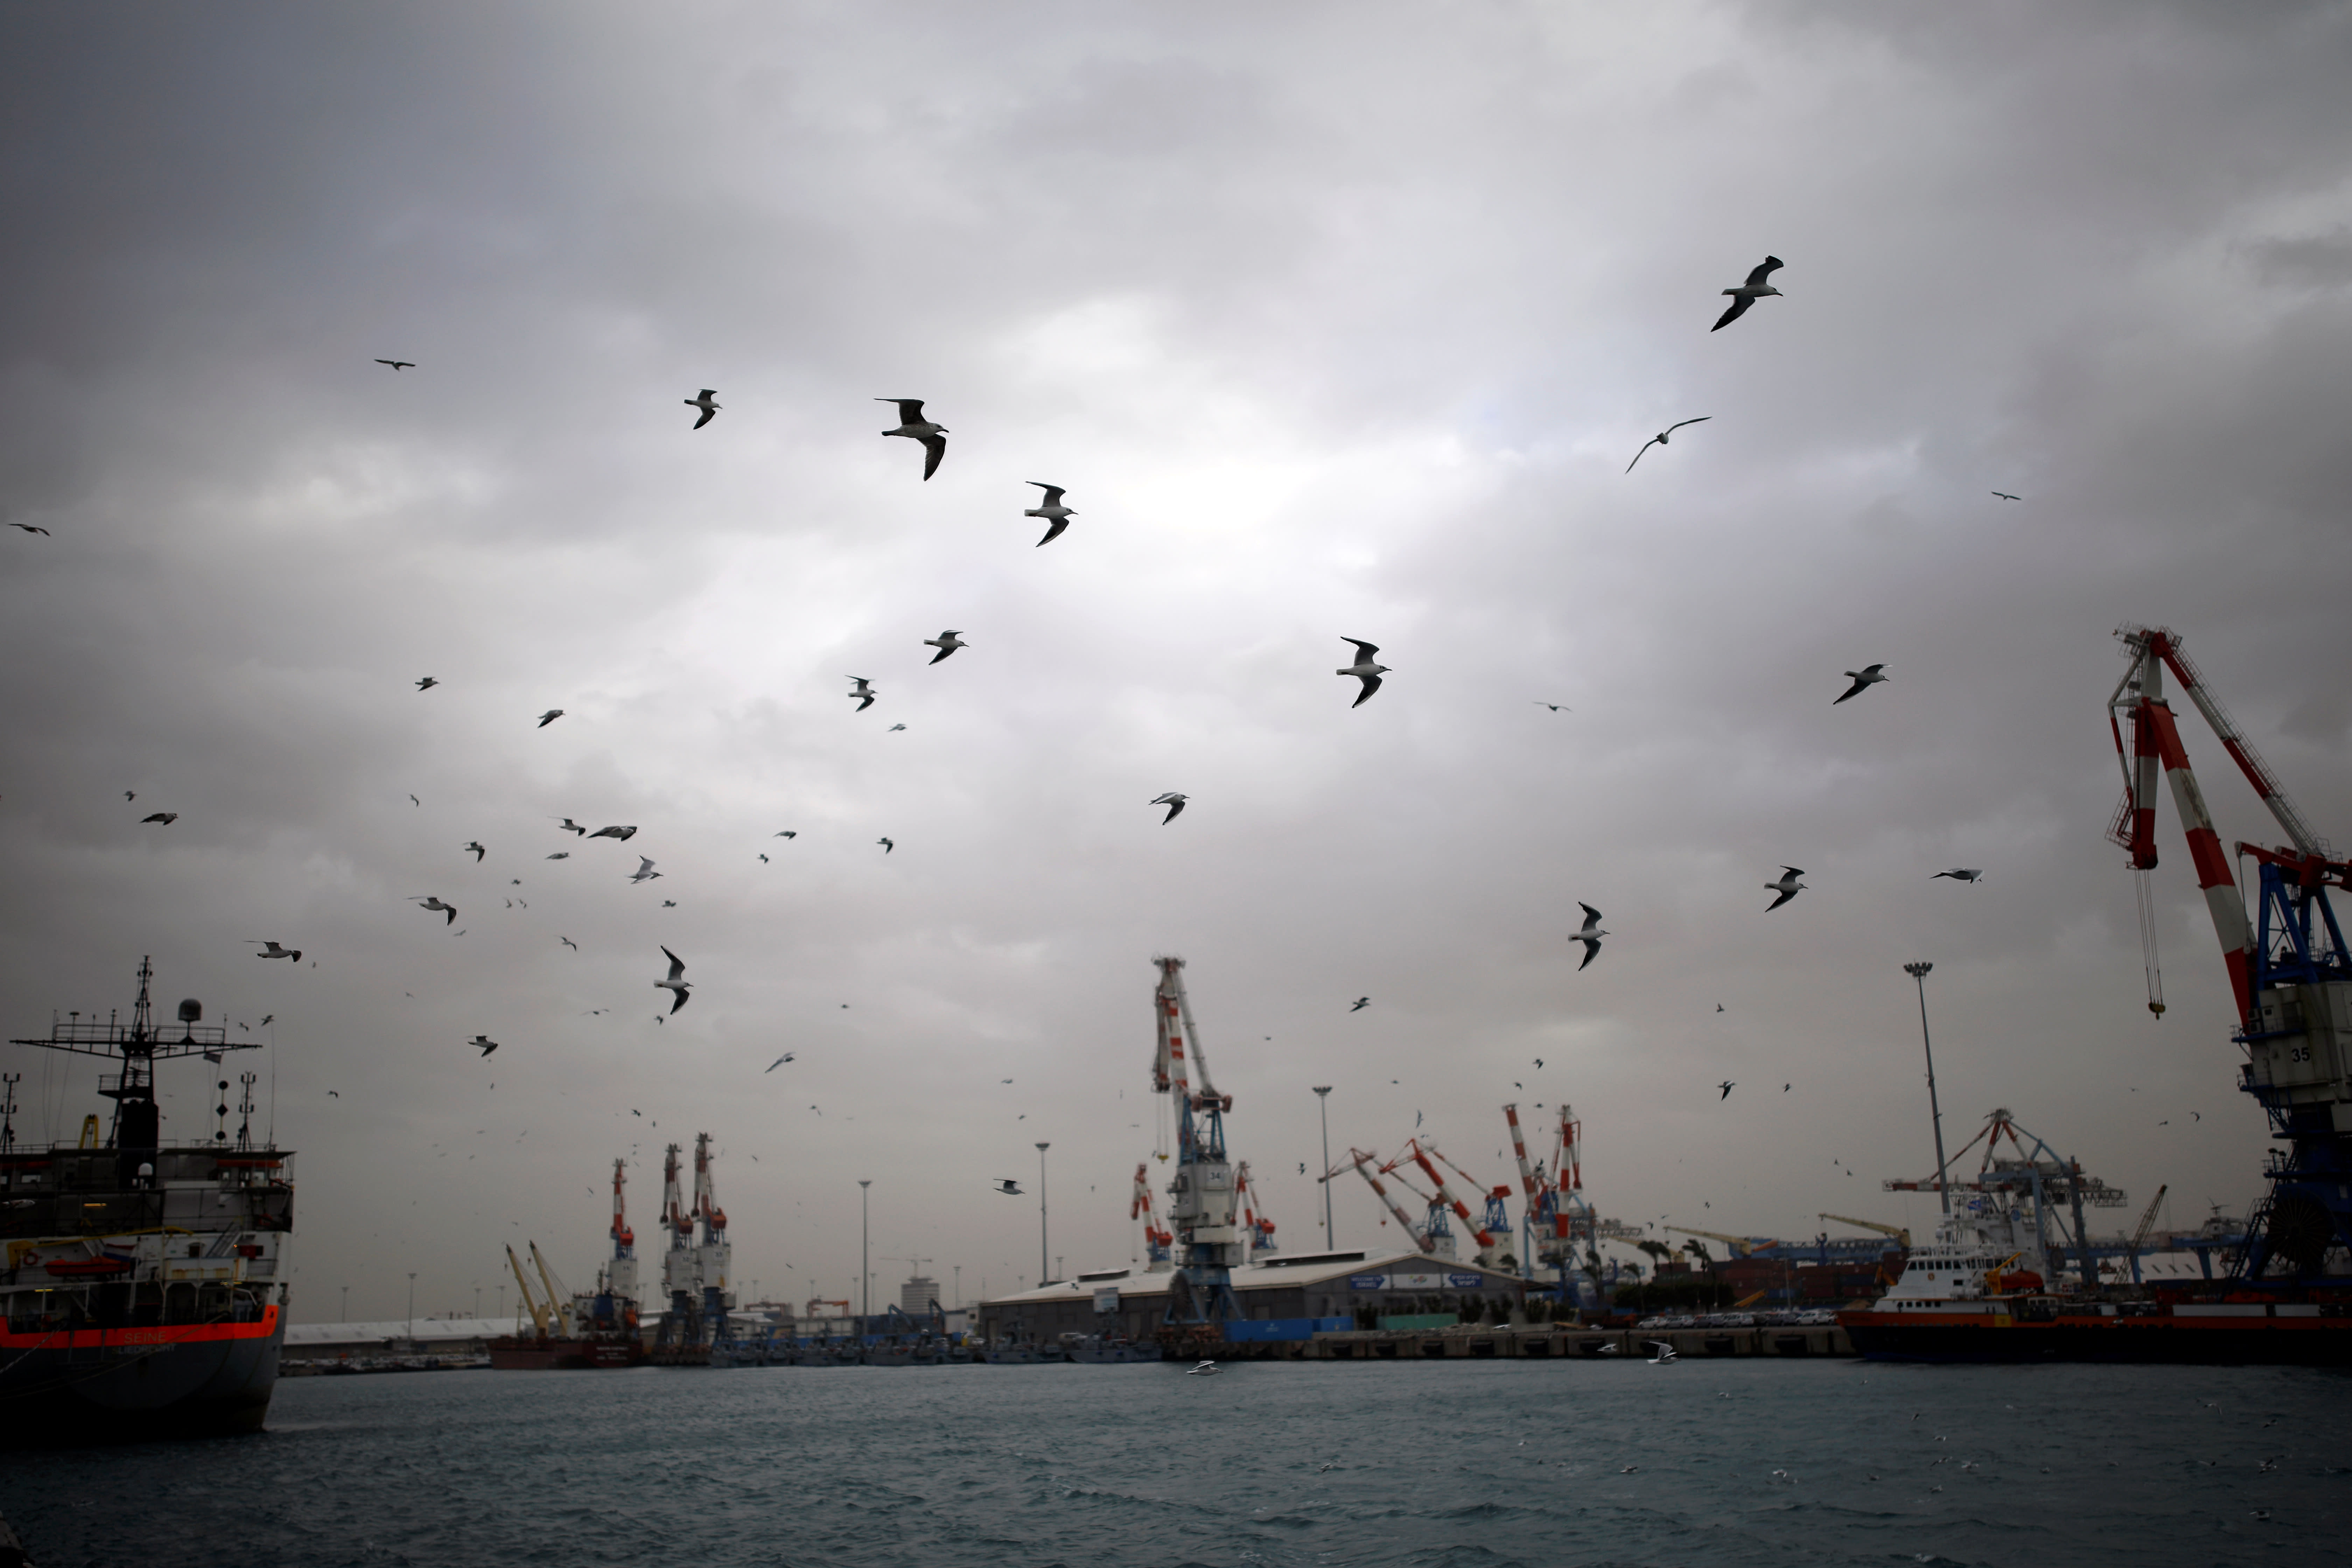 A general view shows seagulls in Ashdod port as a storm approaches Israel's shores January 4, 2018. (Reuters/Amir Cohen)